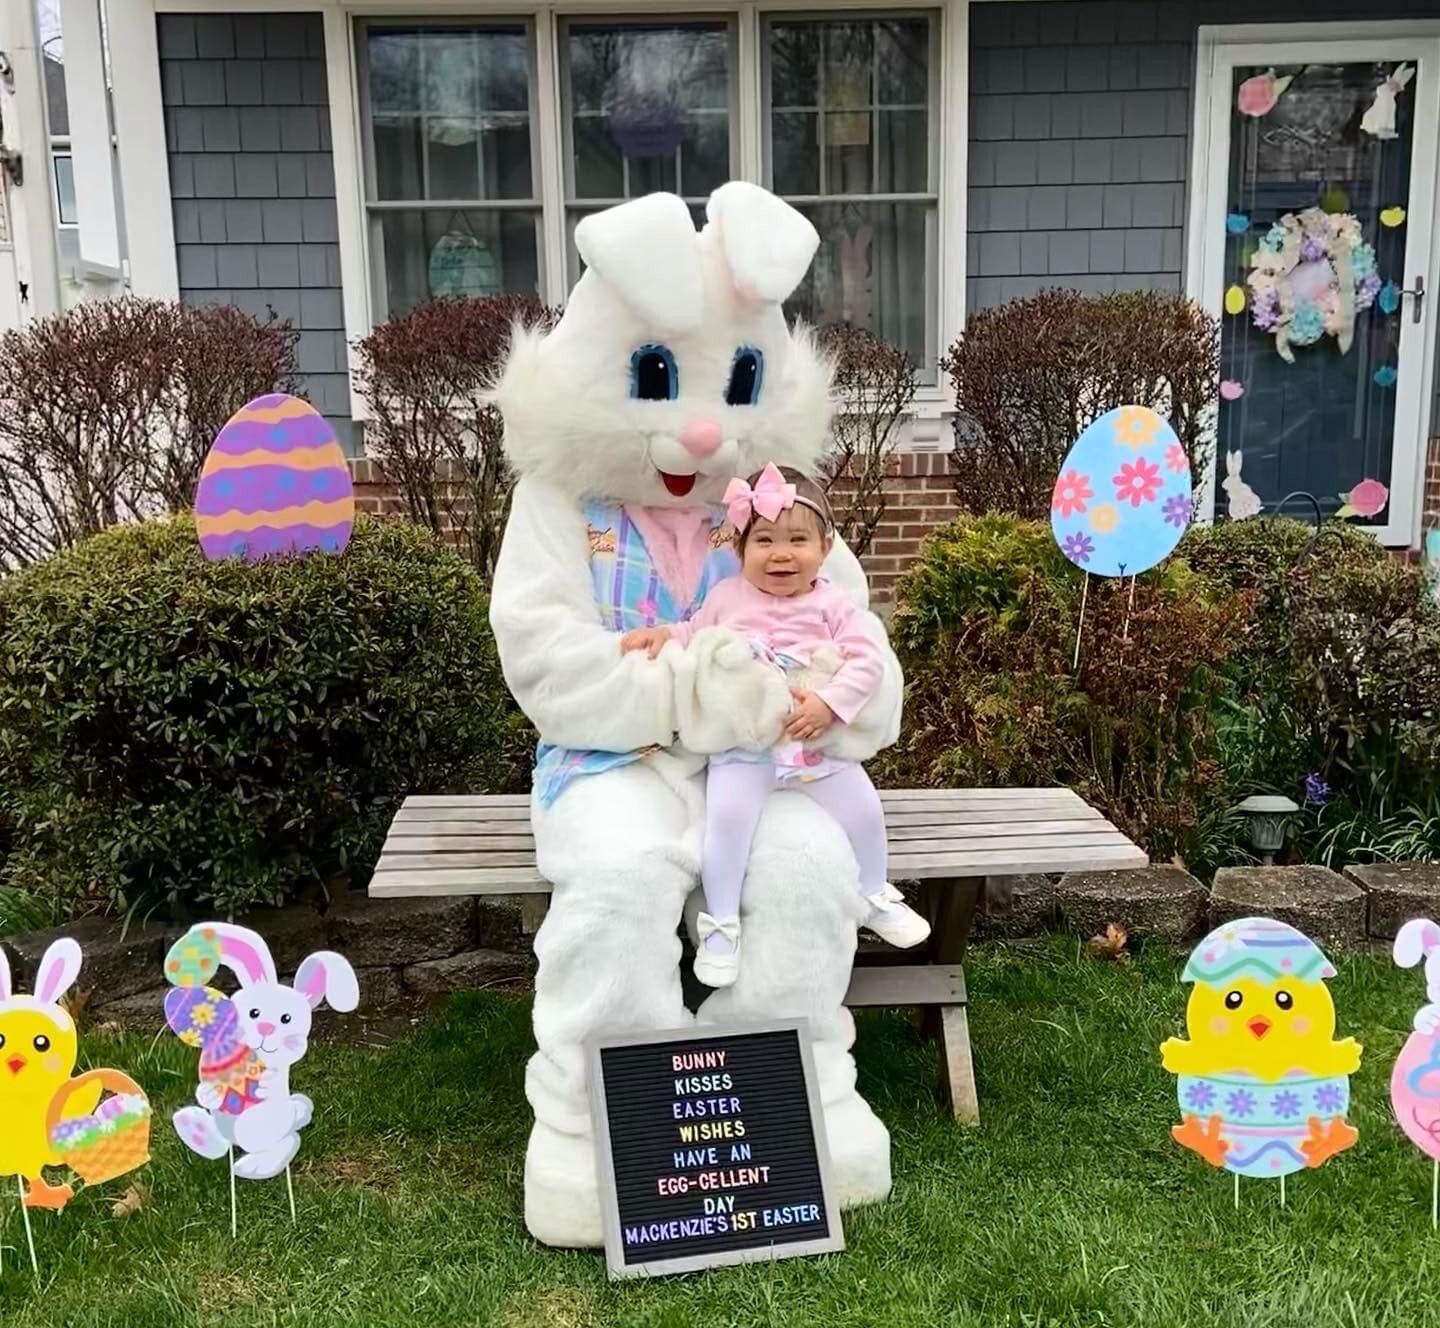 Easter Bunny Stop Over for Photos